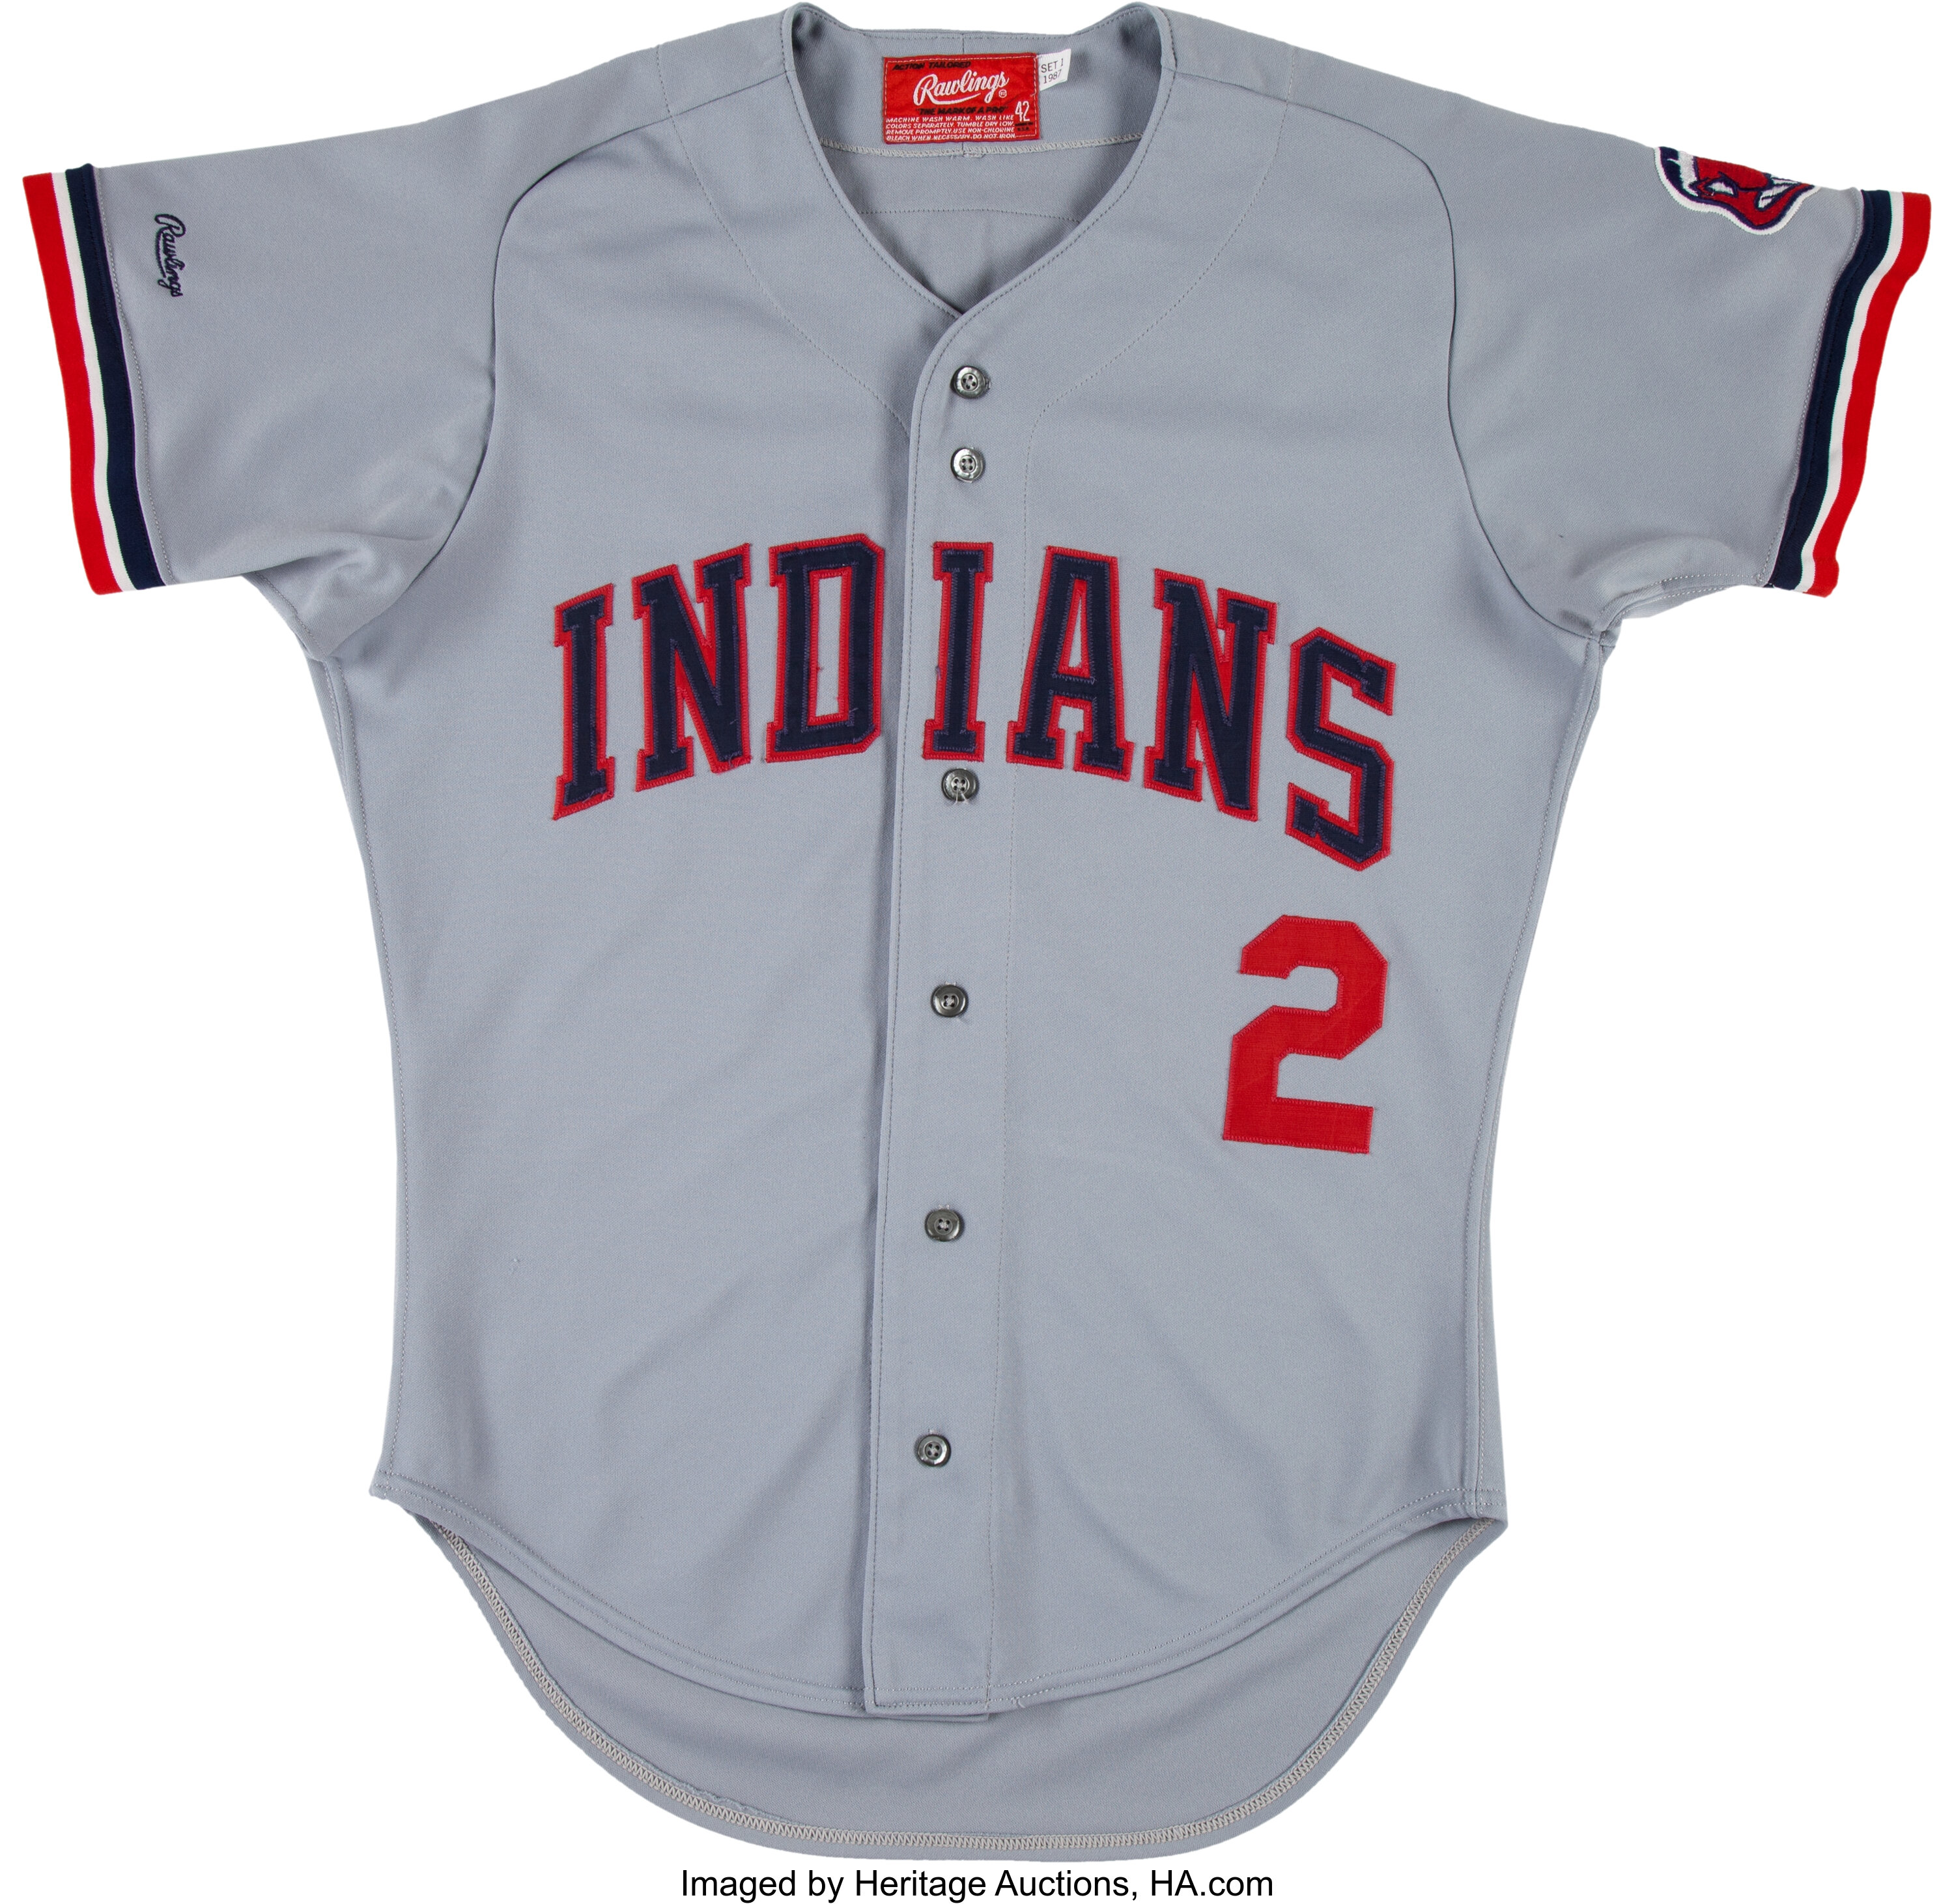 2015 Cleveland Indians by the (uniform) numbers, #41 and up - Covering the  Corner